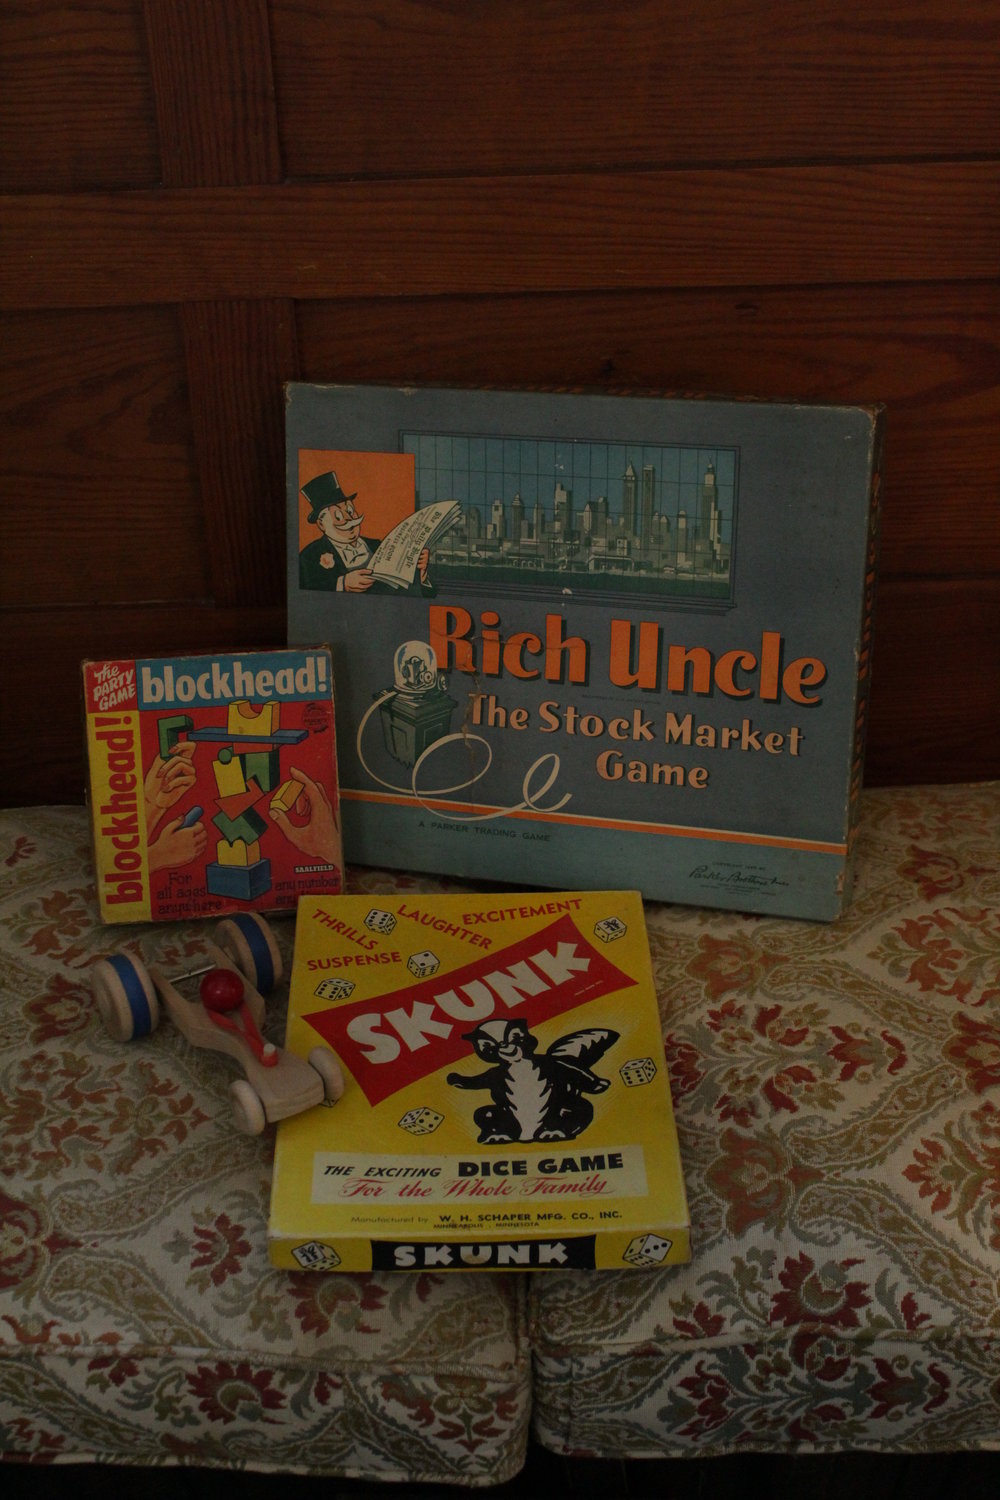 You can find all sorts of great old games at local antique stores, flea markets, or garage sales.